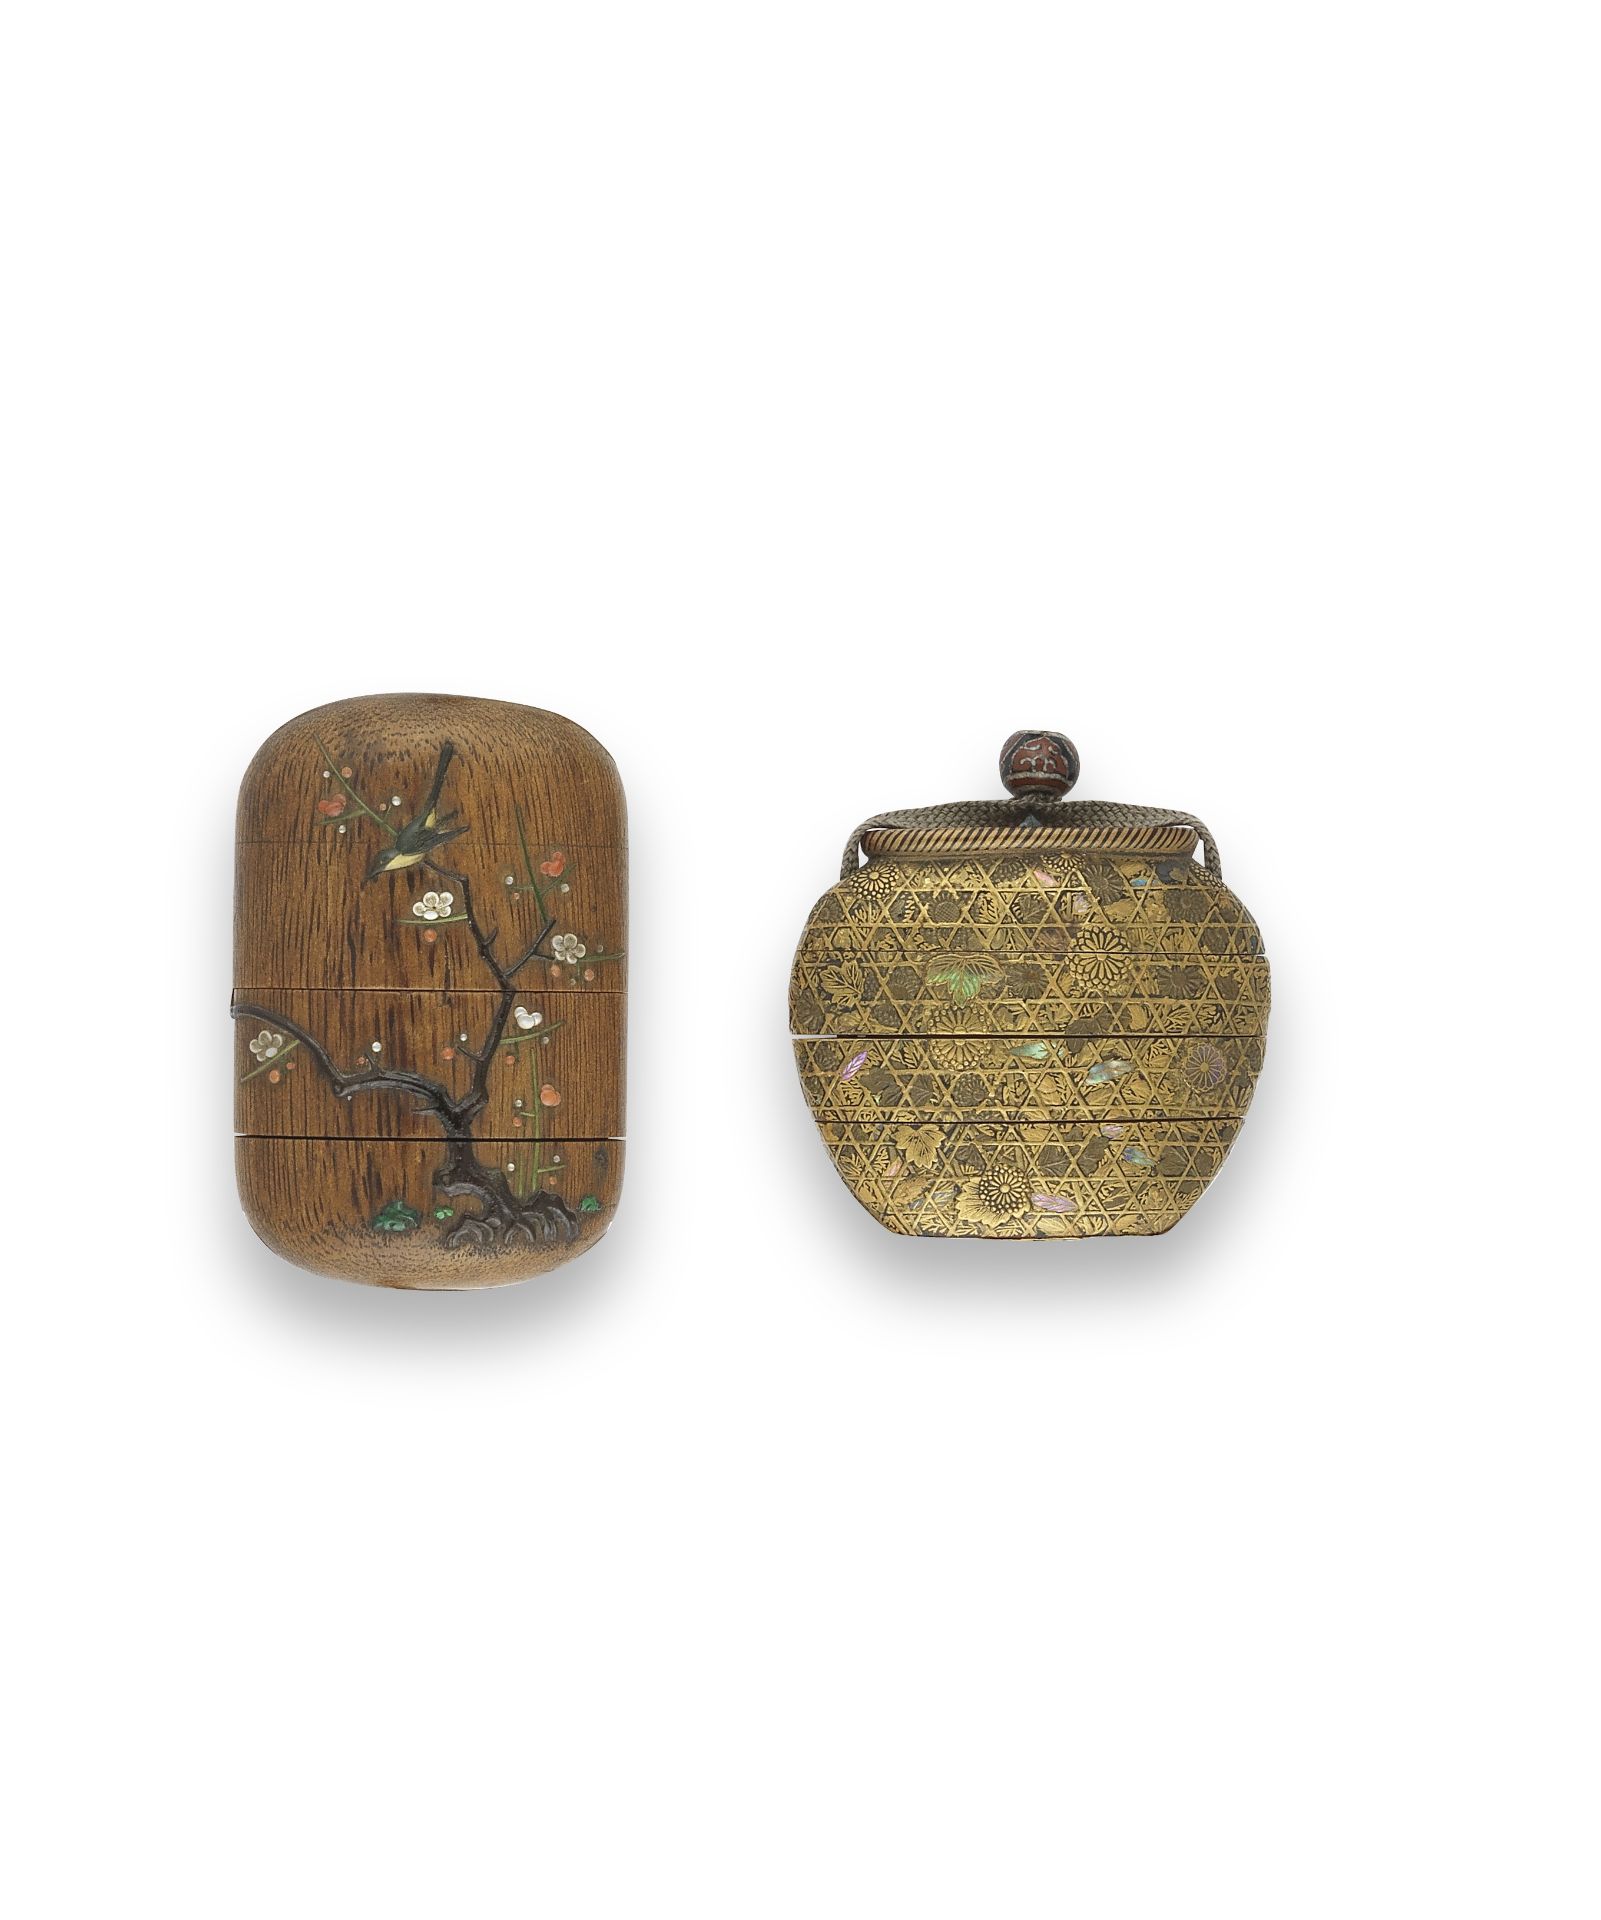 ONE GOLD-LACQUERED THREE-CASE INRO AND ONE INLAID WOOD THREE-CASE INRO Edo period (1615-1868) or ...